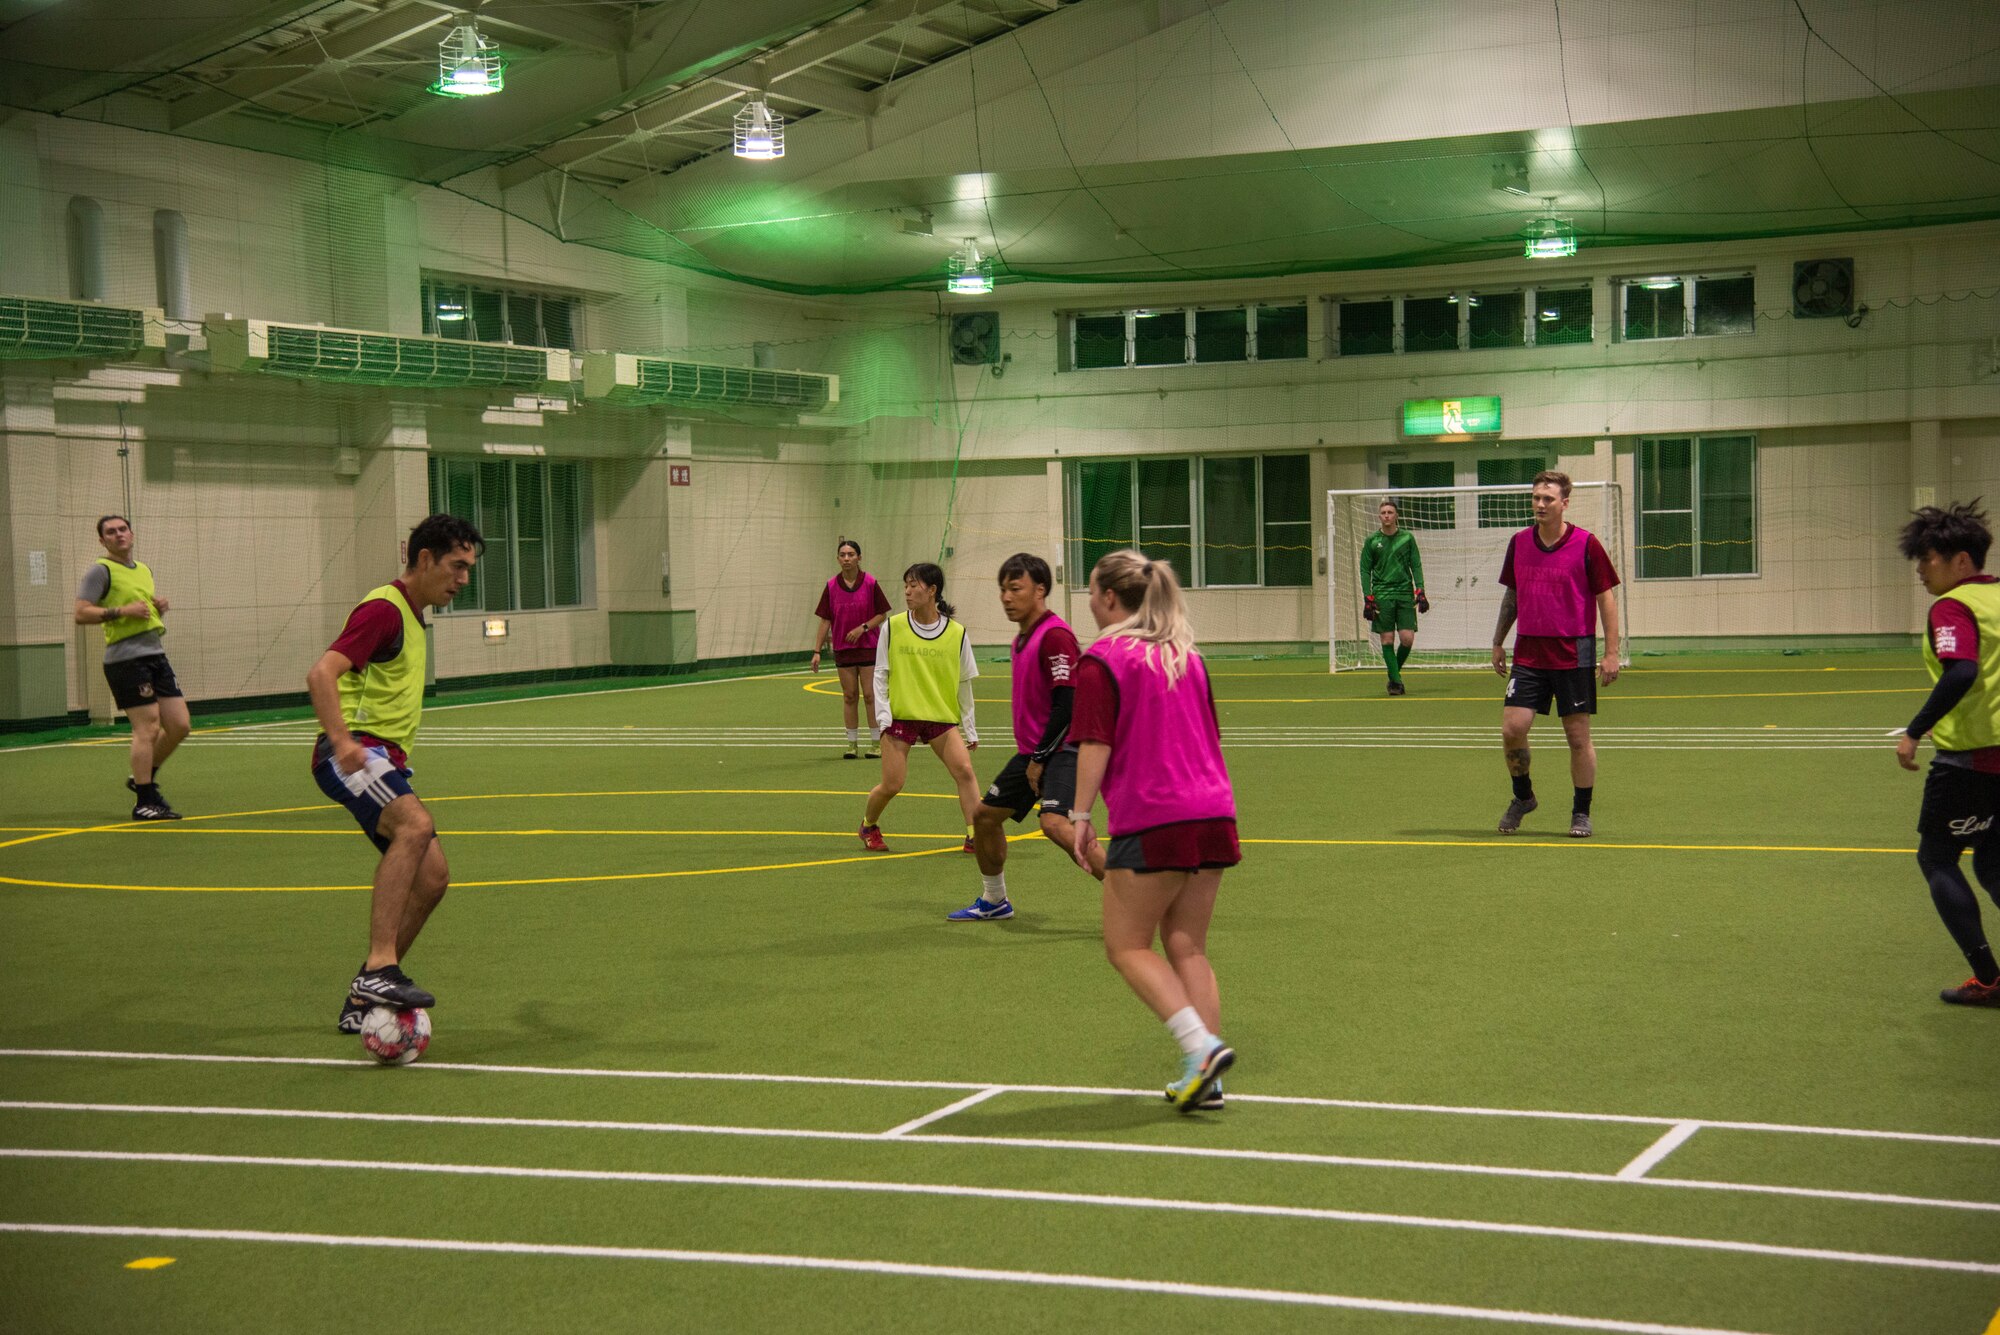 A group of soccer players practice at an indoor soccer field in Misawa.